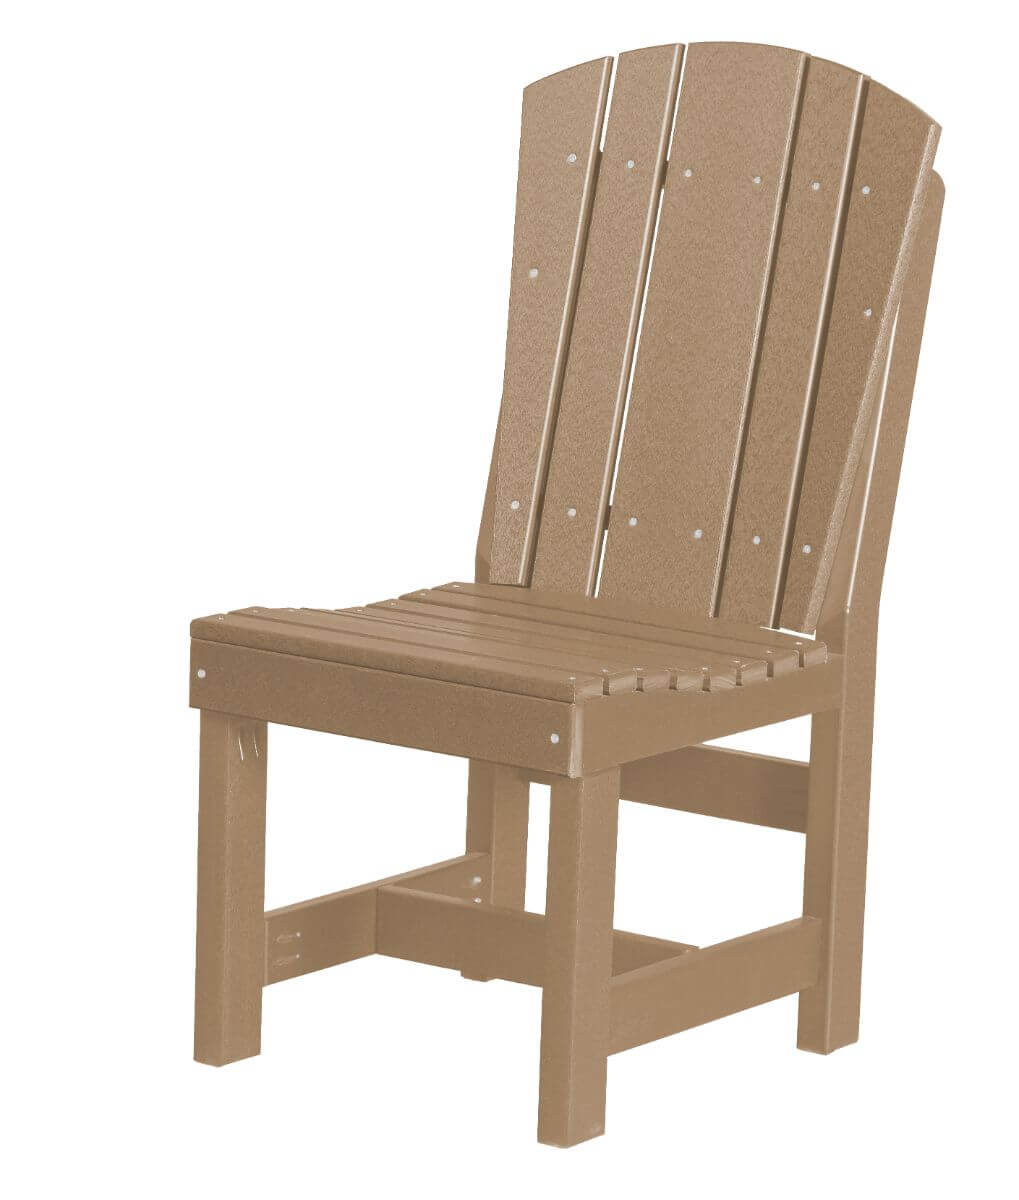 Weathered Wood Oristano Outdoor Dining Chair